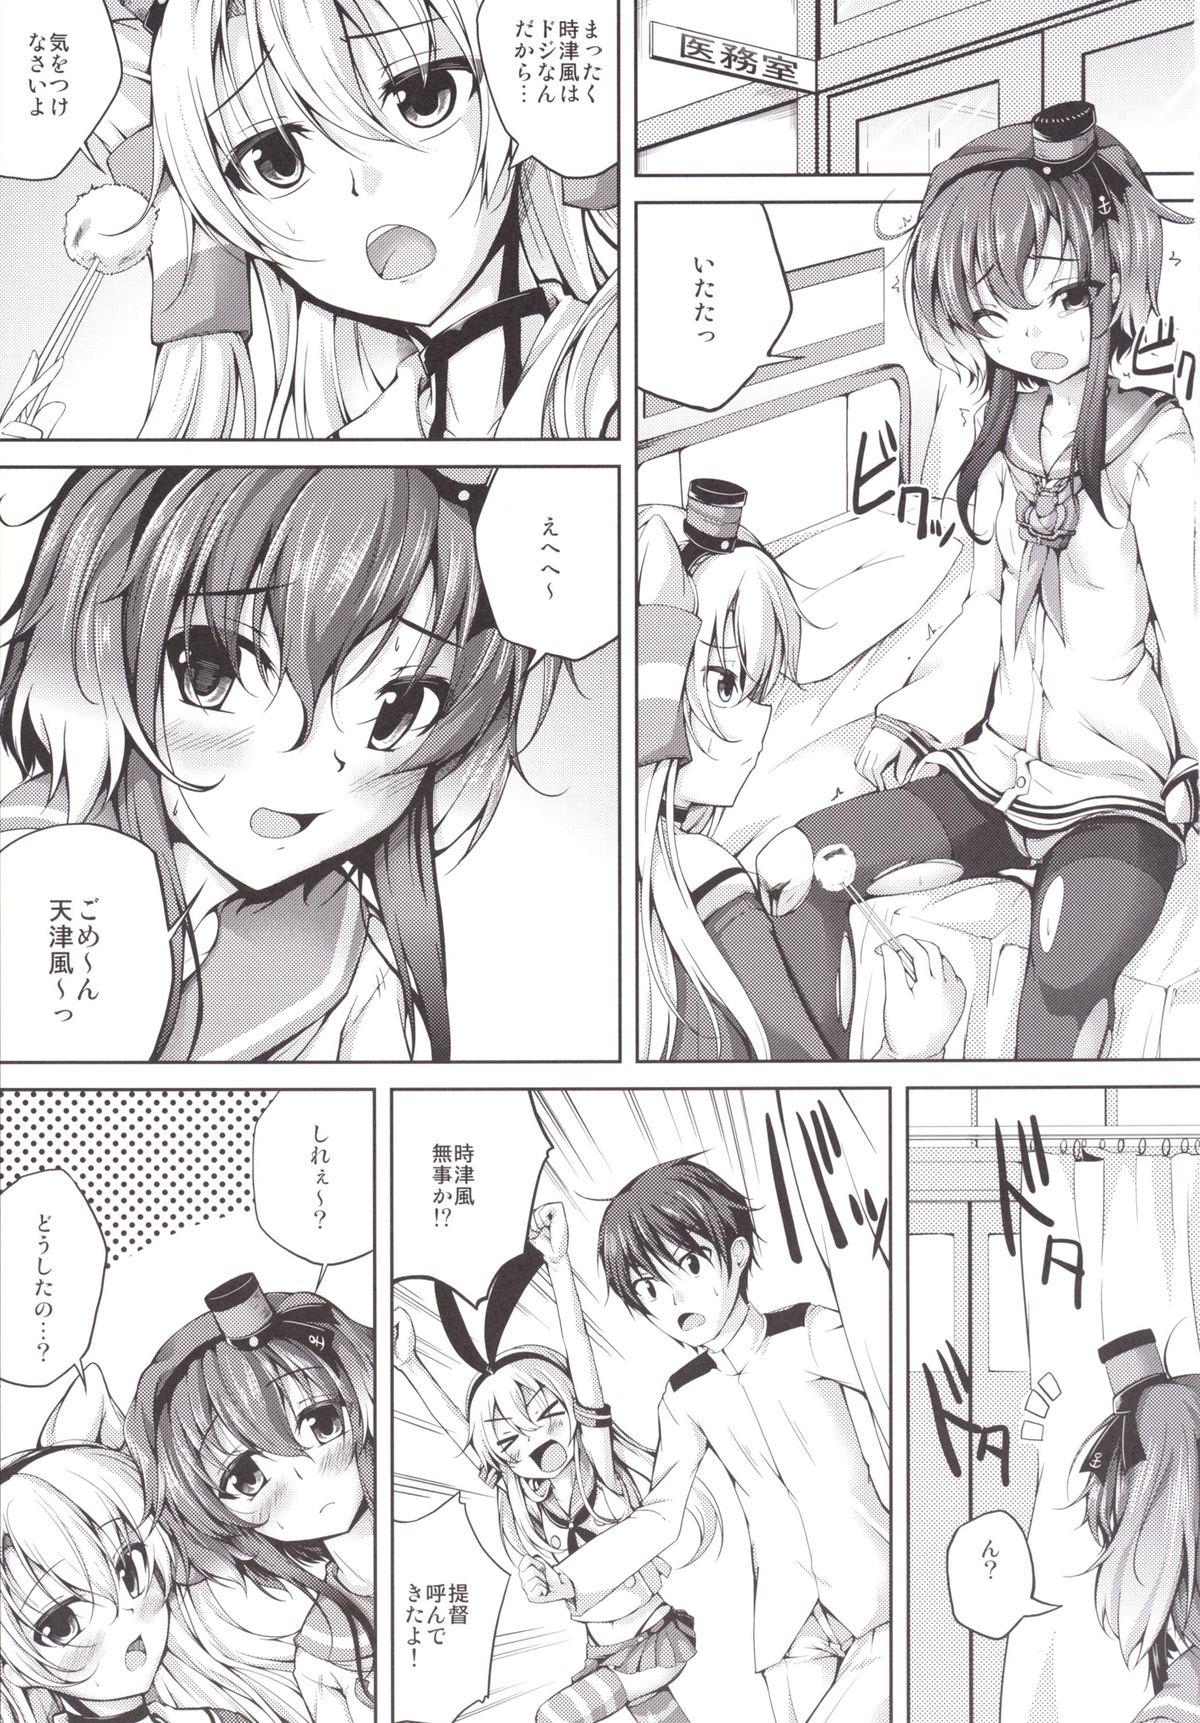 Face Sitting Koiiro Moyou 9 - Kantai collection Cumload - Page 2